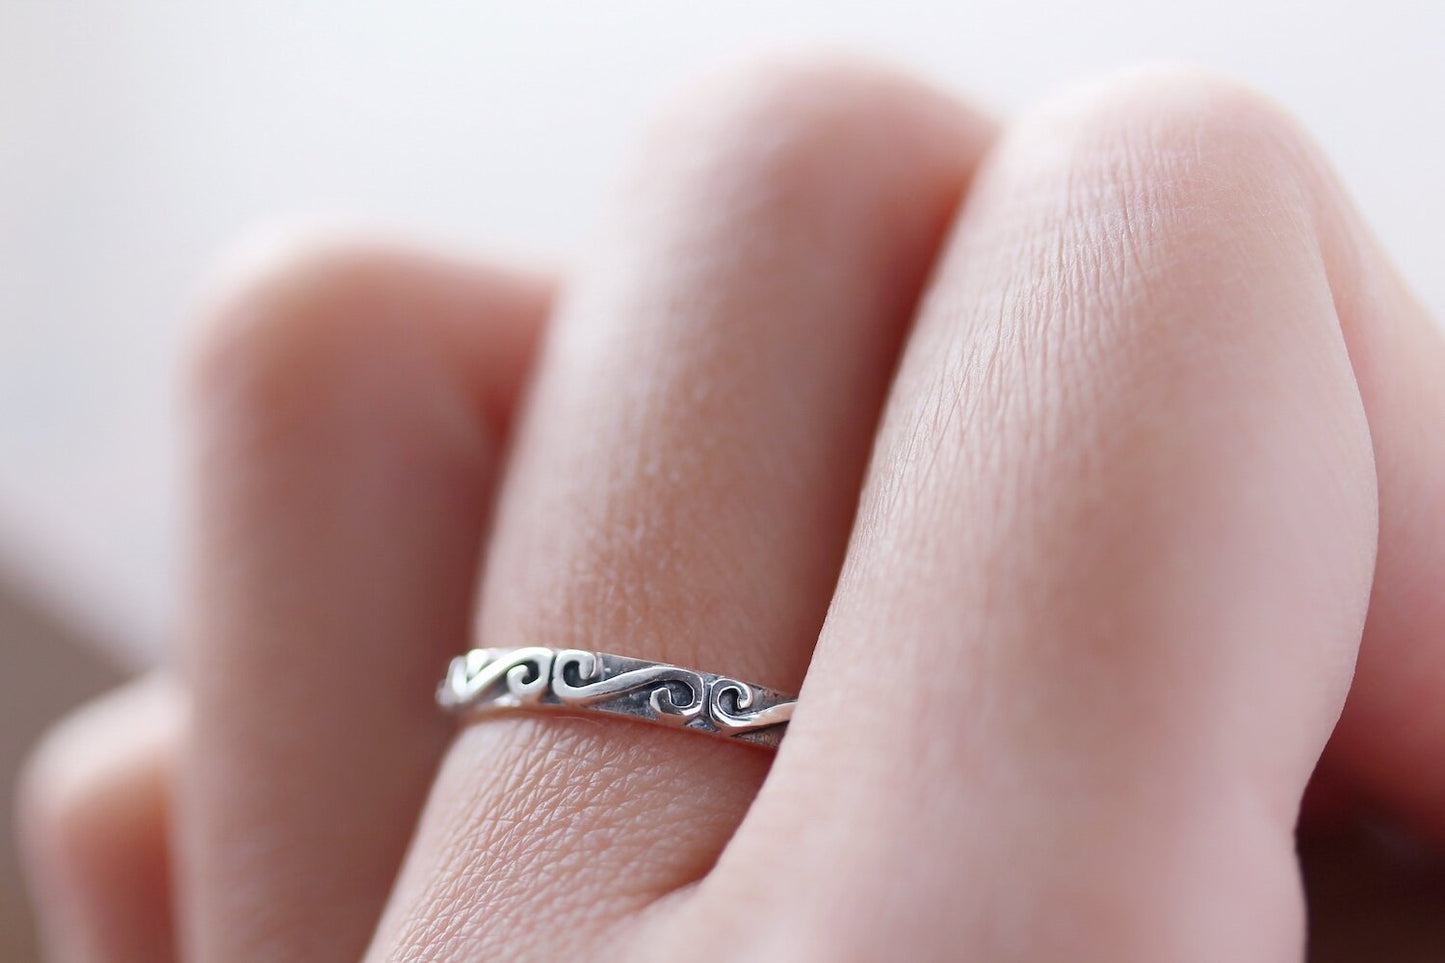 Celtic Knot Ring - Swirl Band